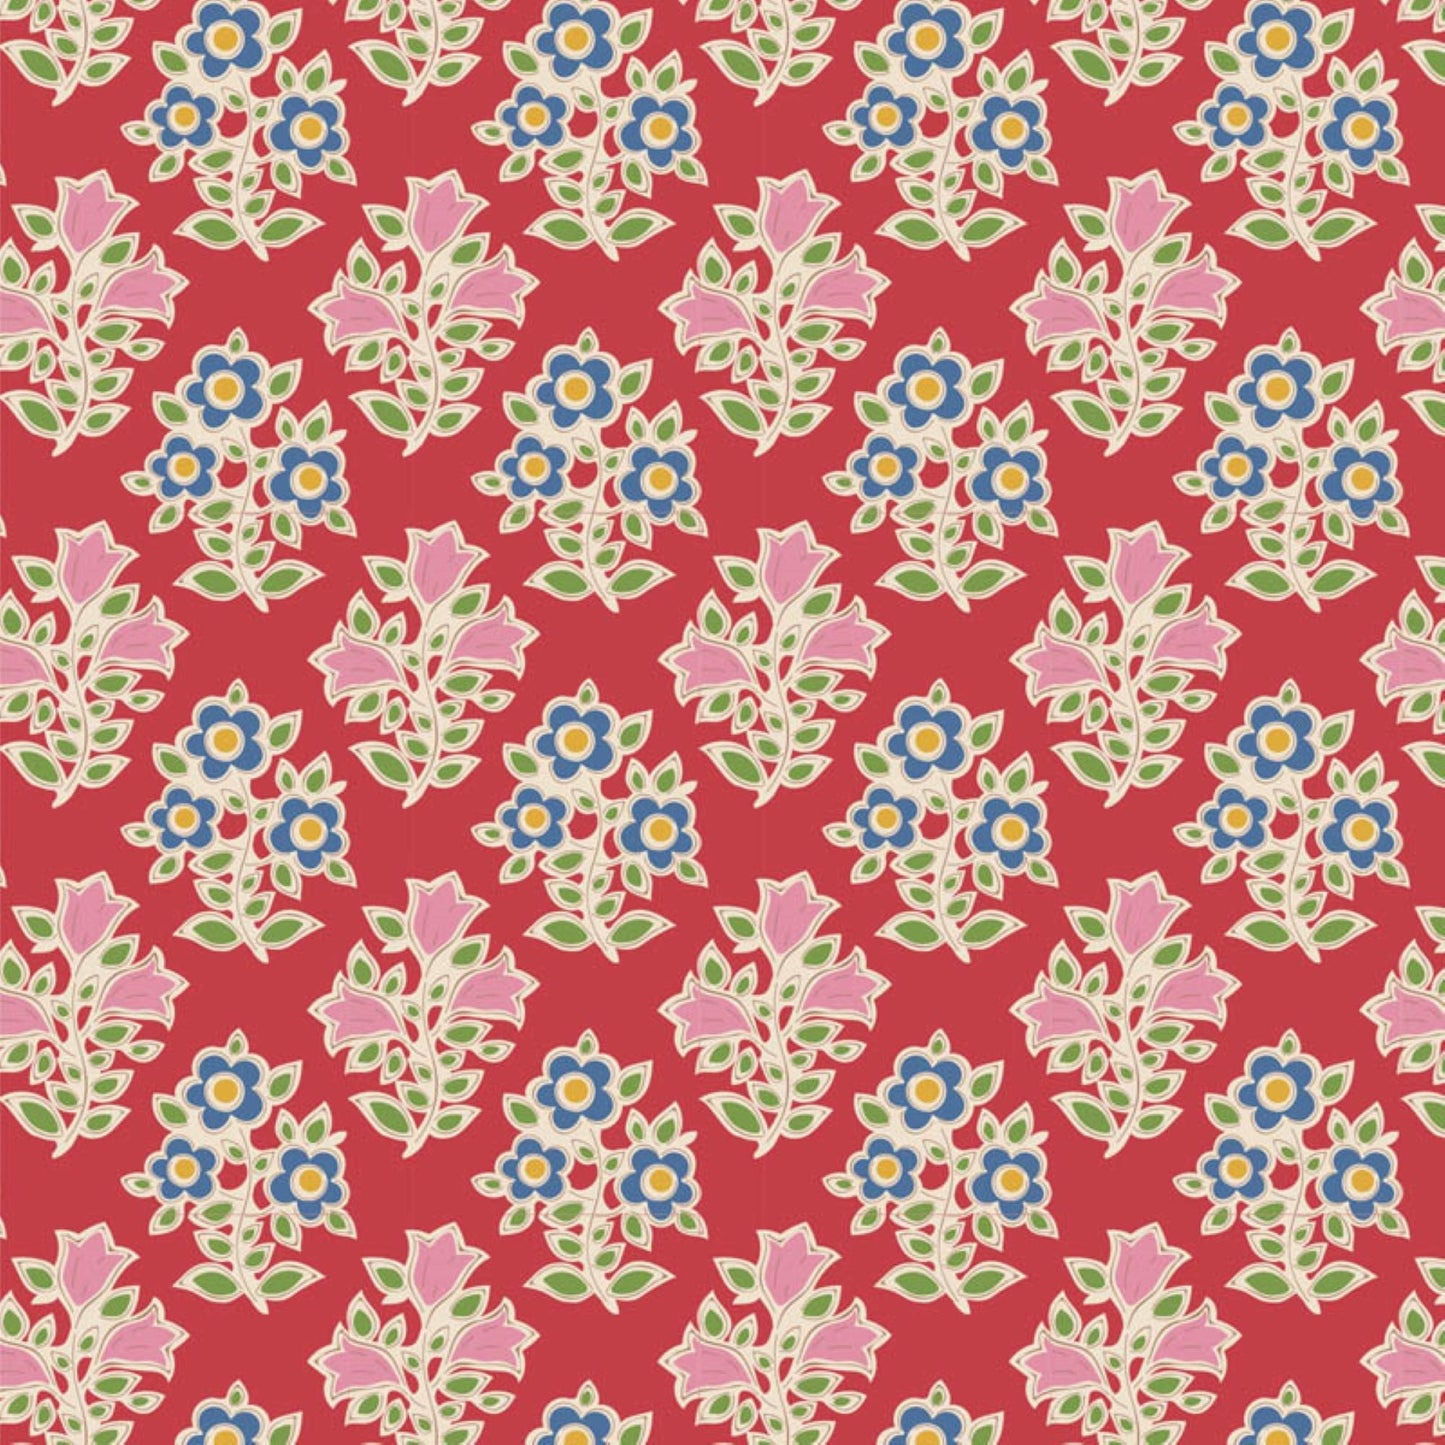 Tilda Jubilee and Farm Flowers floral red bundle 7 Fat 16's cotton quilt fabric